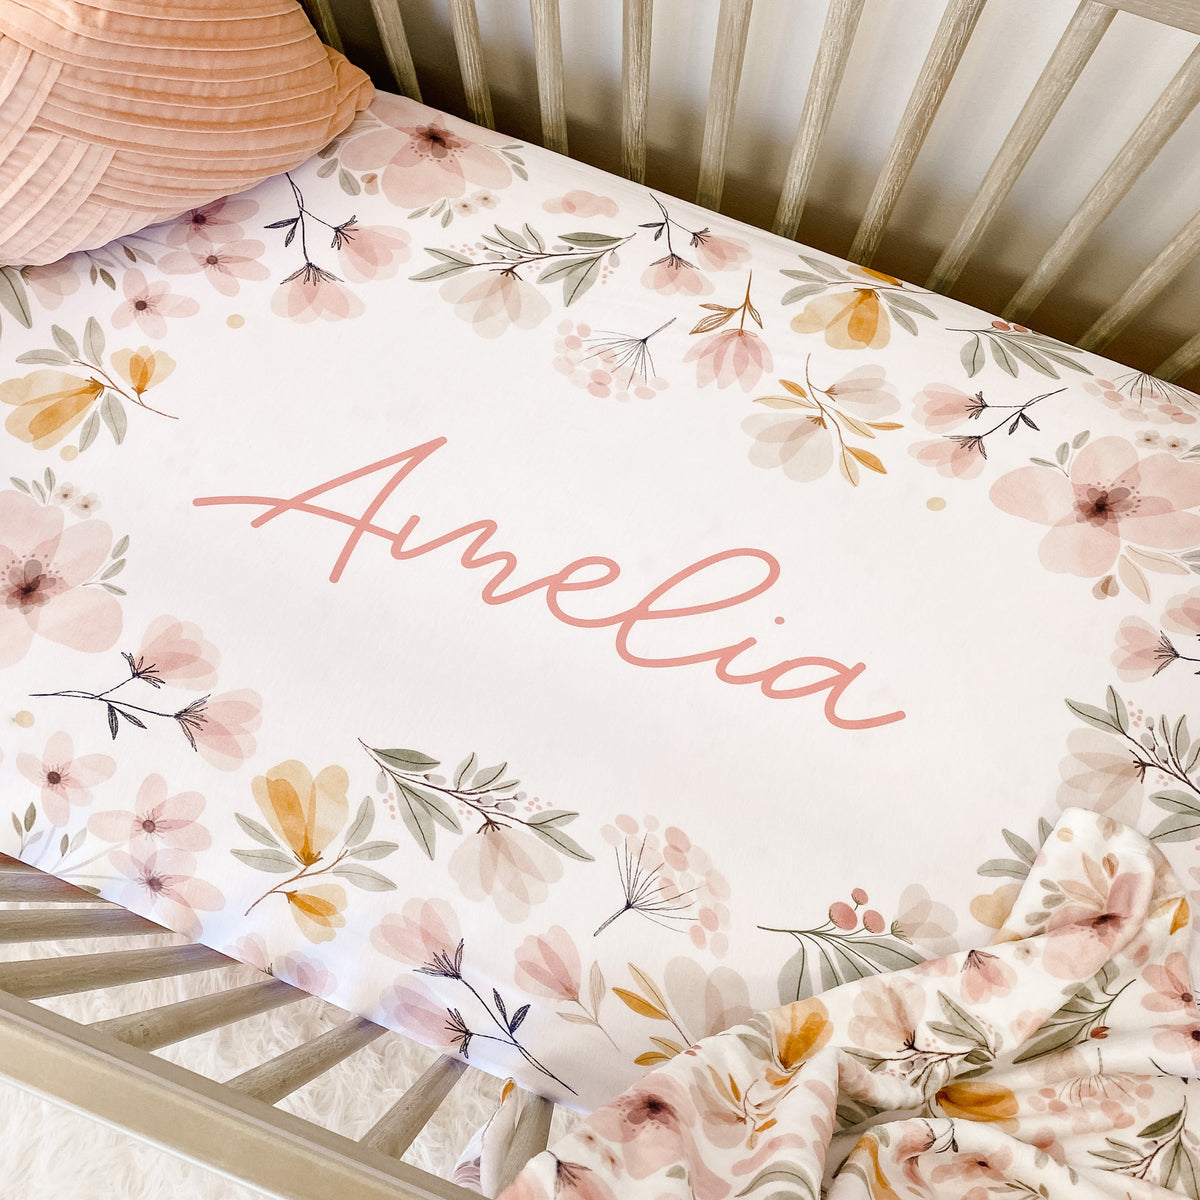 Maeve's Mauve & Mustard Floral Personalized Crib Sheet